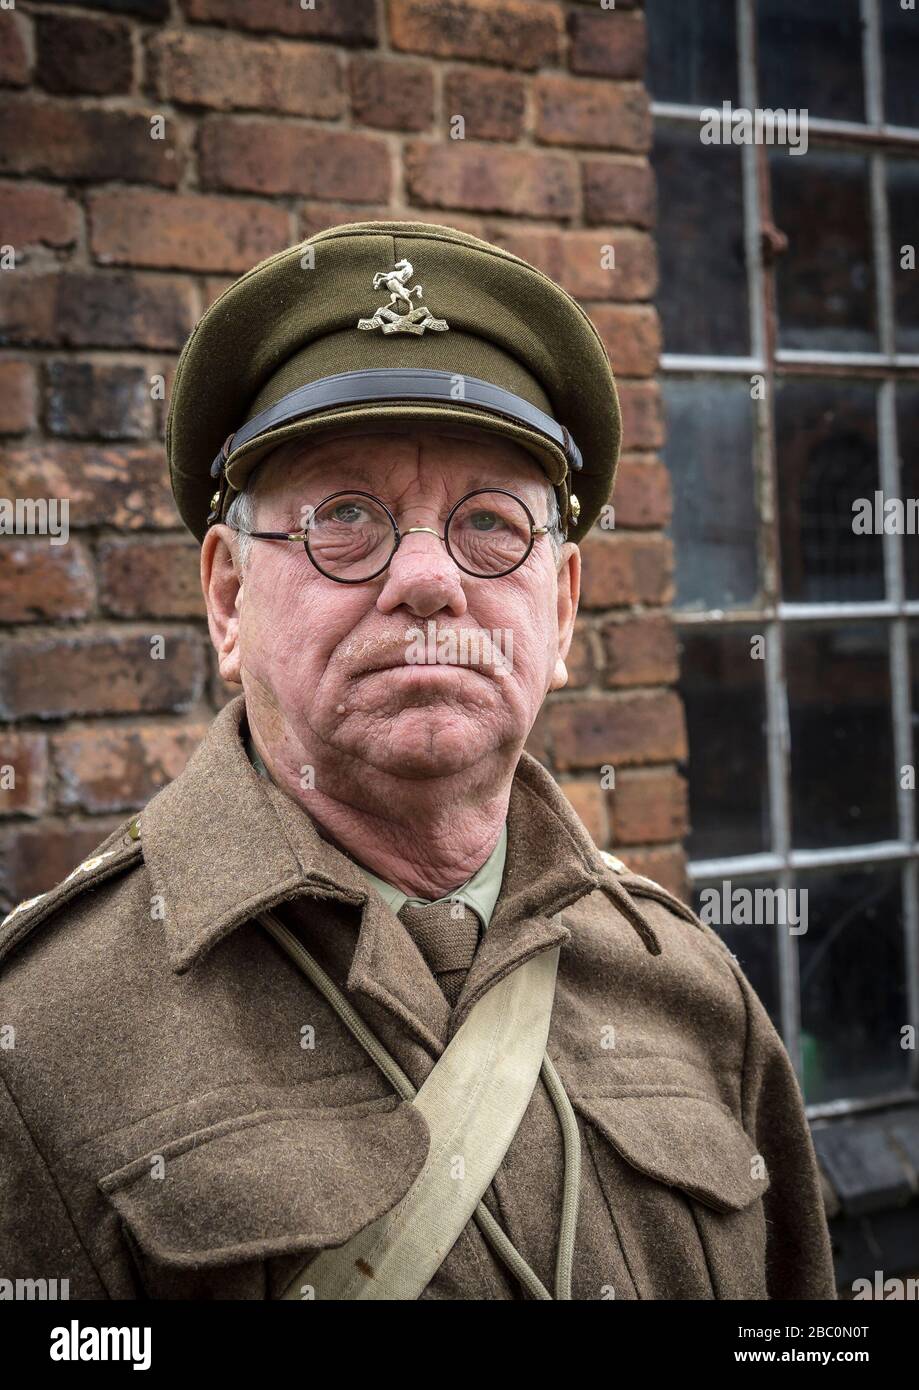 Close-up portrait of man in Home Guard army uniform as Captain Mainwaring isolated outdoors, Black Country Living Museum 1940s wartime summer event UK. Stock Photo